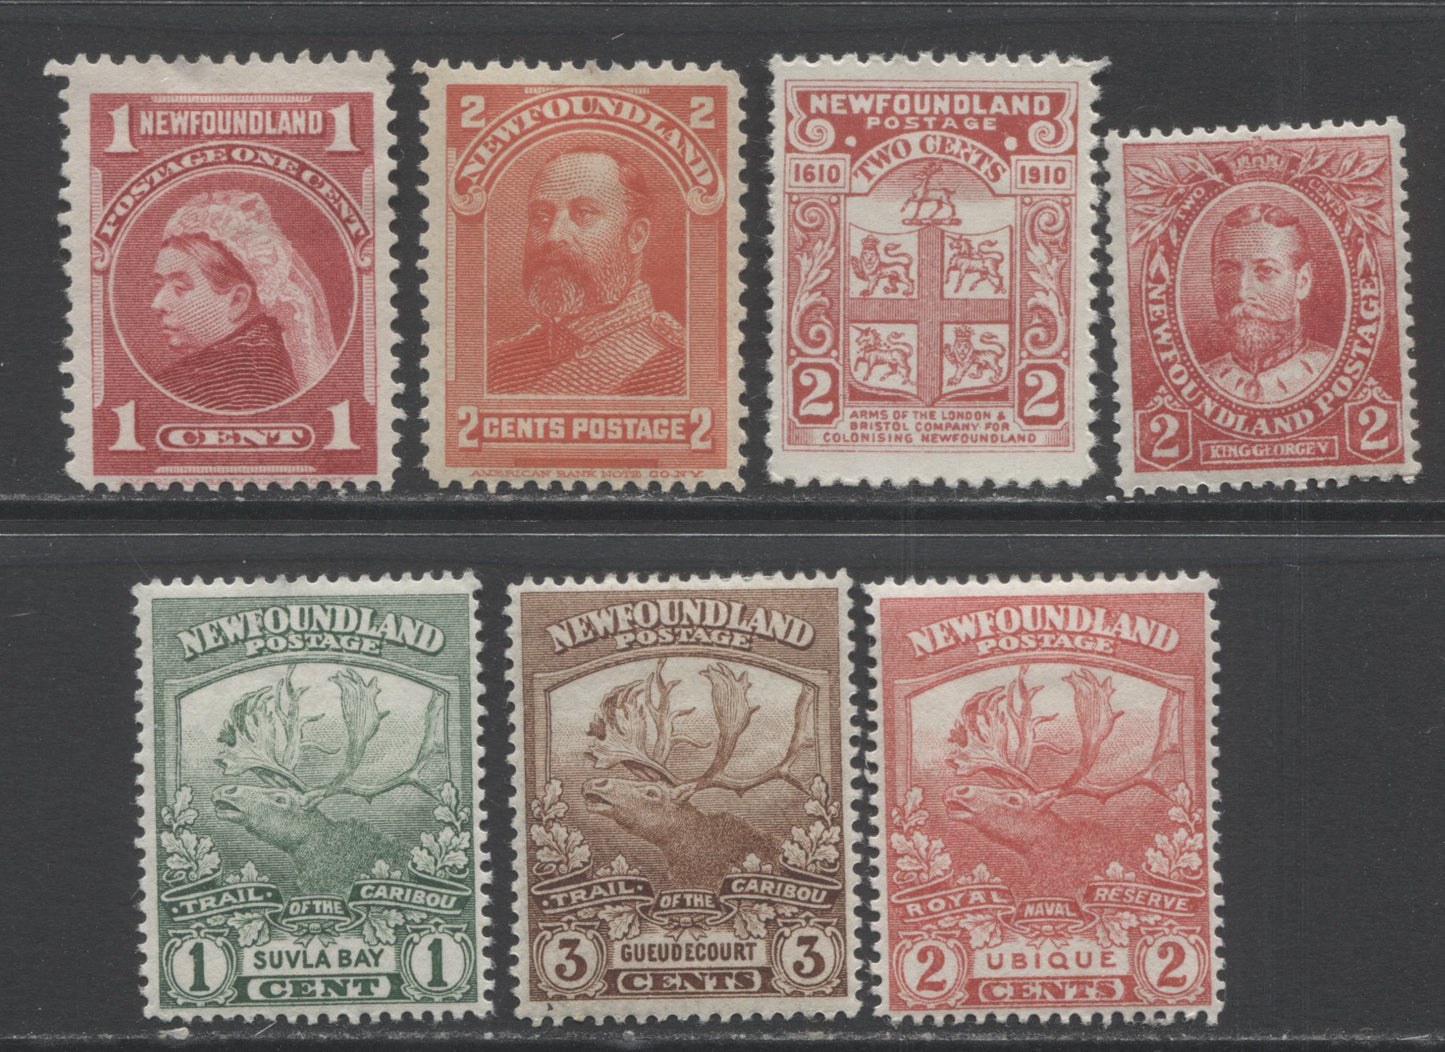 Lot 341 Newfoundland #79, 82, 88, 103b, 115-117 1c - 3c Carmine Rose - Red Brown Queen Victoria, King Edward VII, Coat Of Arms & Caribou, 1897-1919 Commemoratives & Definitives, 7 VG, Fine and VFOG Singles